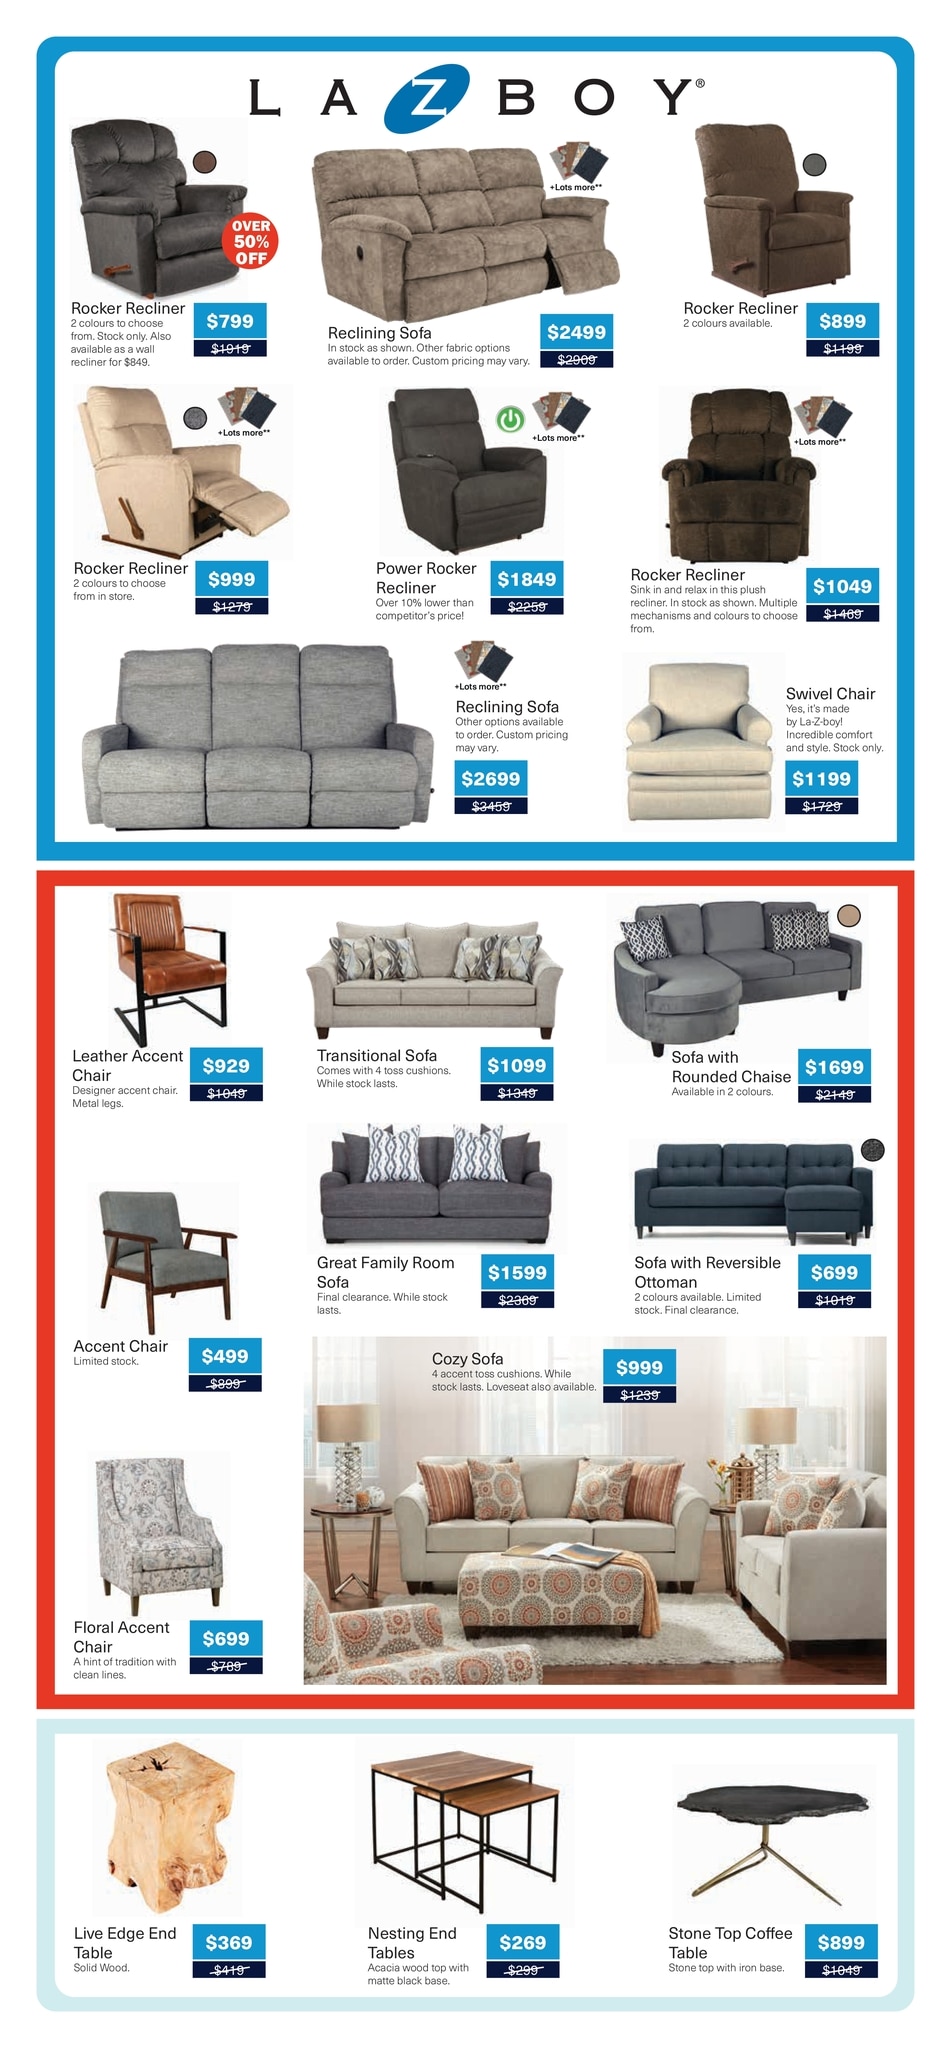 Bennett's Furniture and Mattresses - Monthly Savings - Page 2